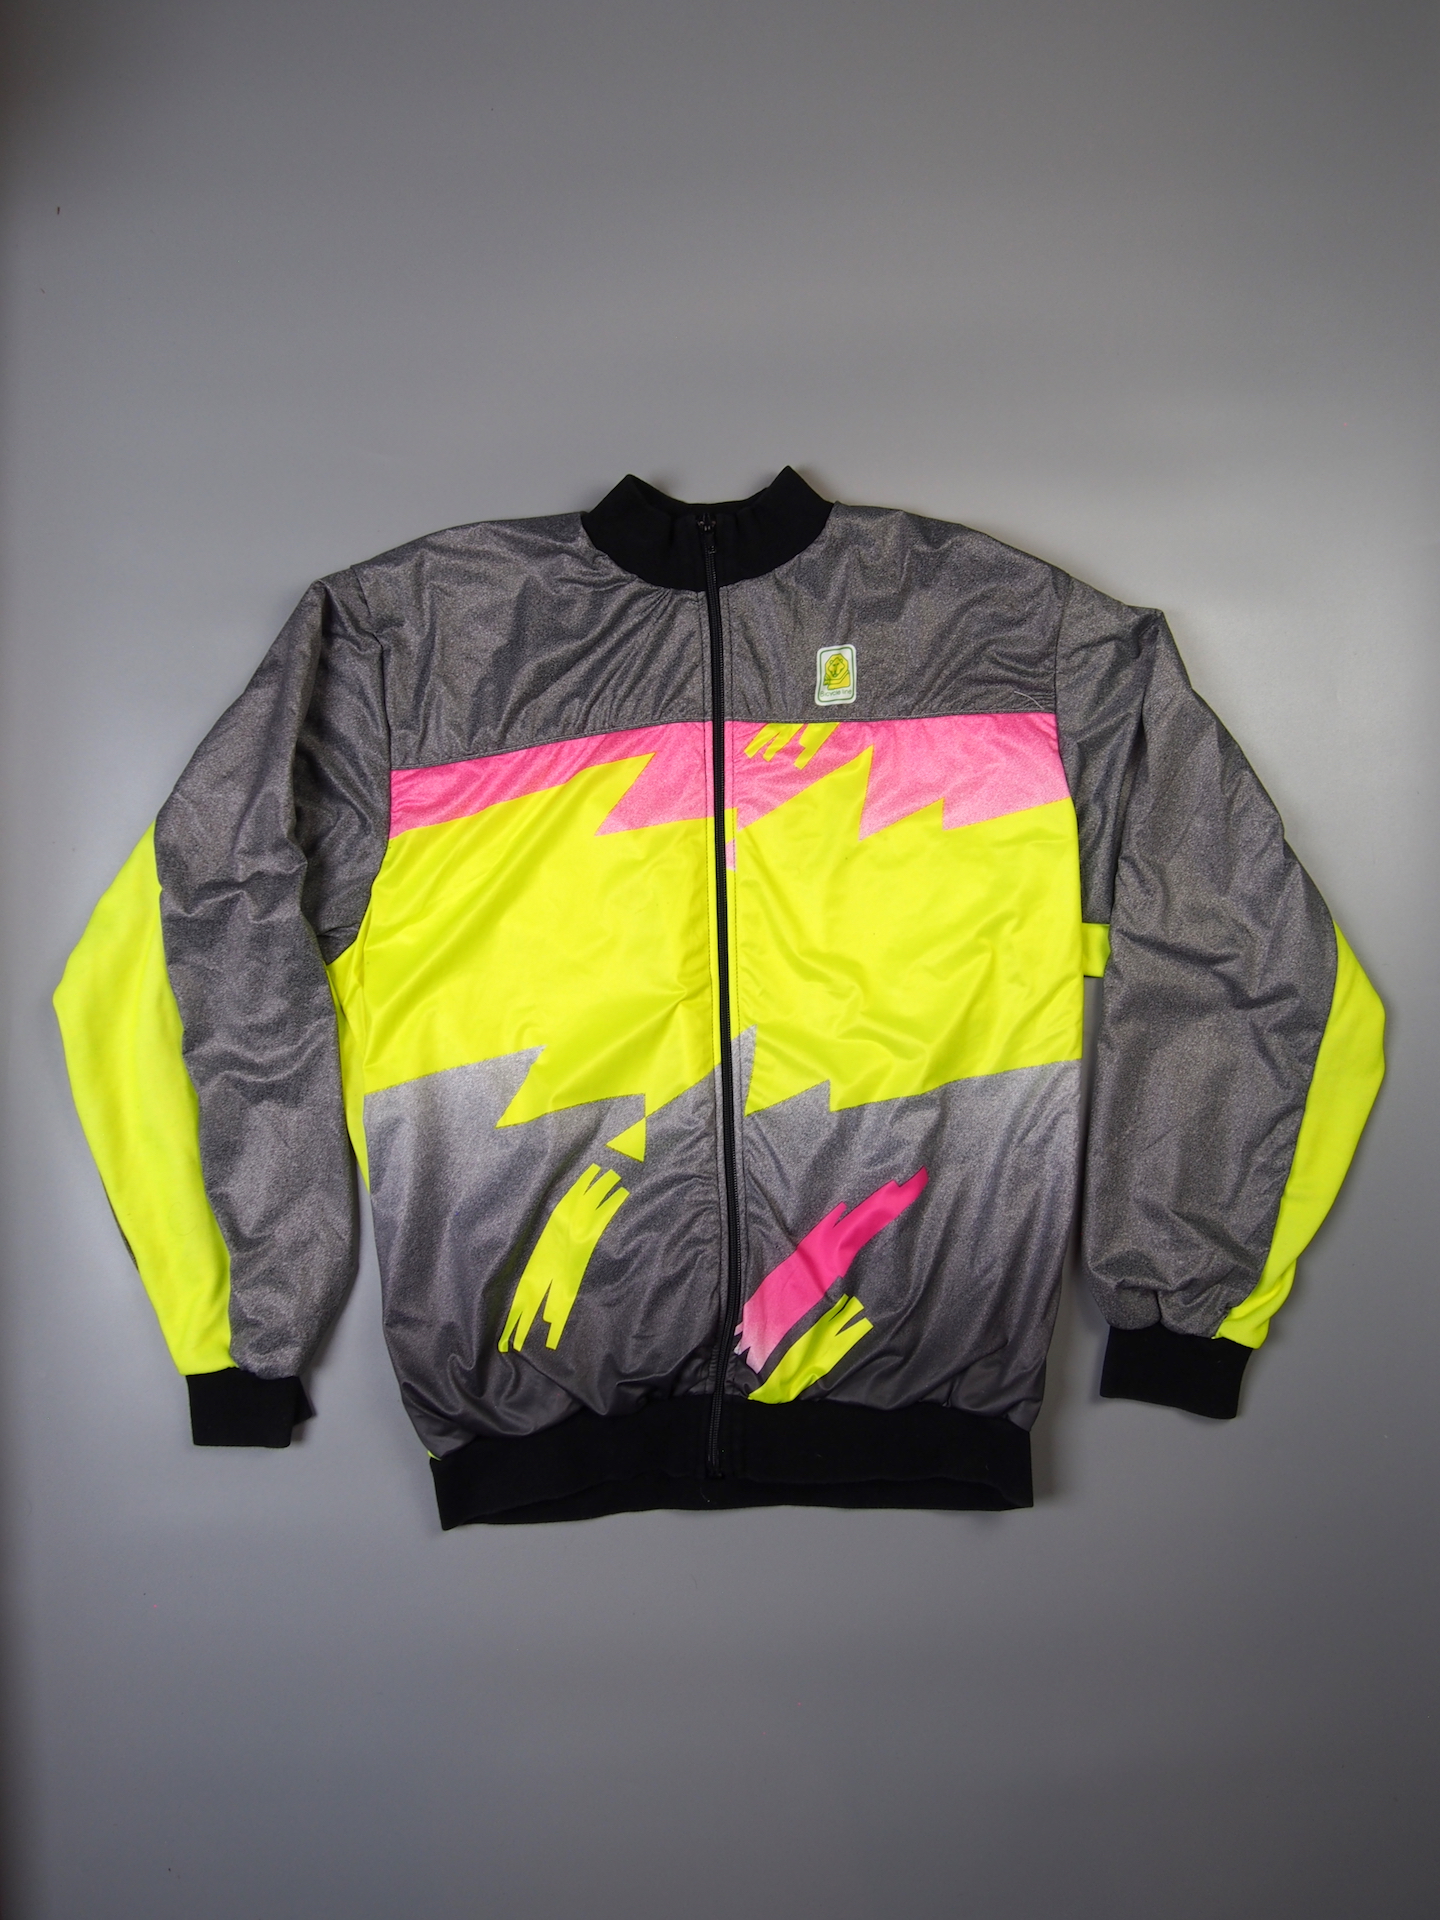 Bicycle Line winter jacket – Silver with Neon PInk & Yellow